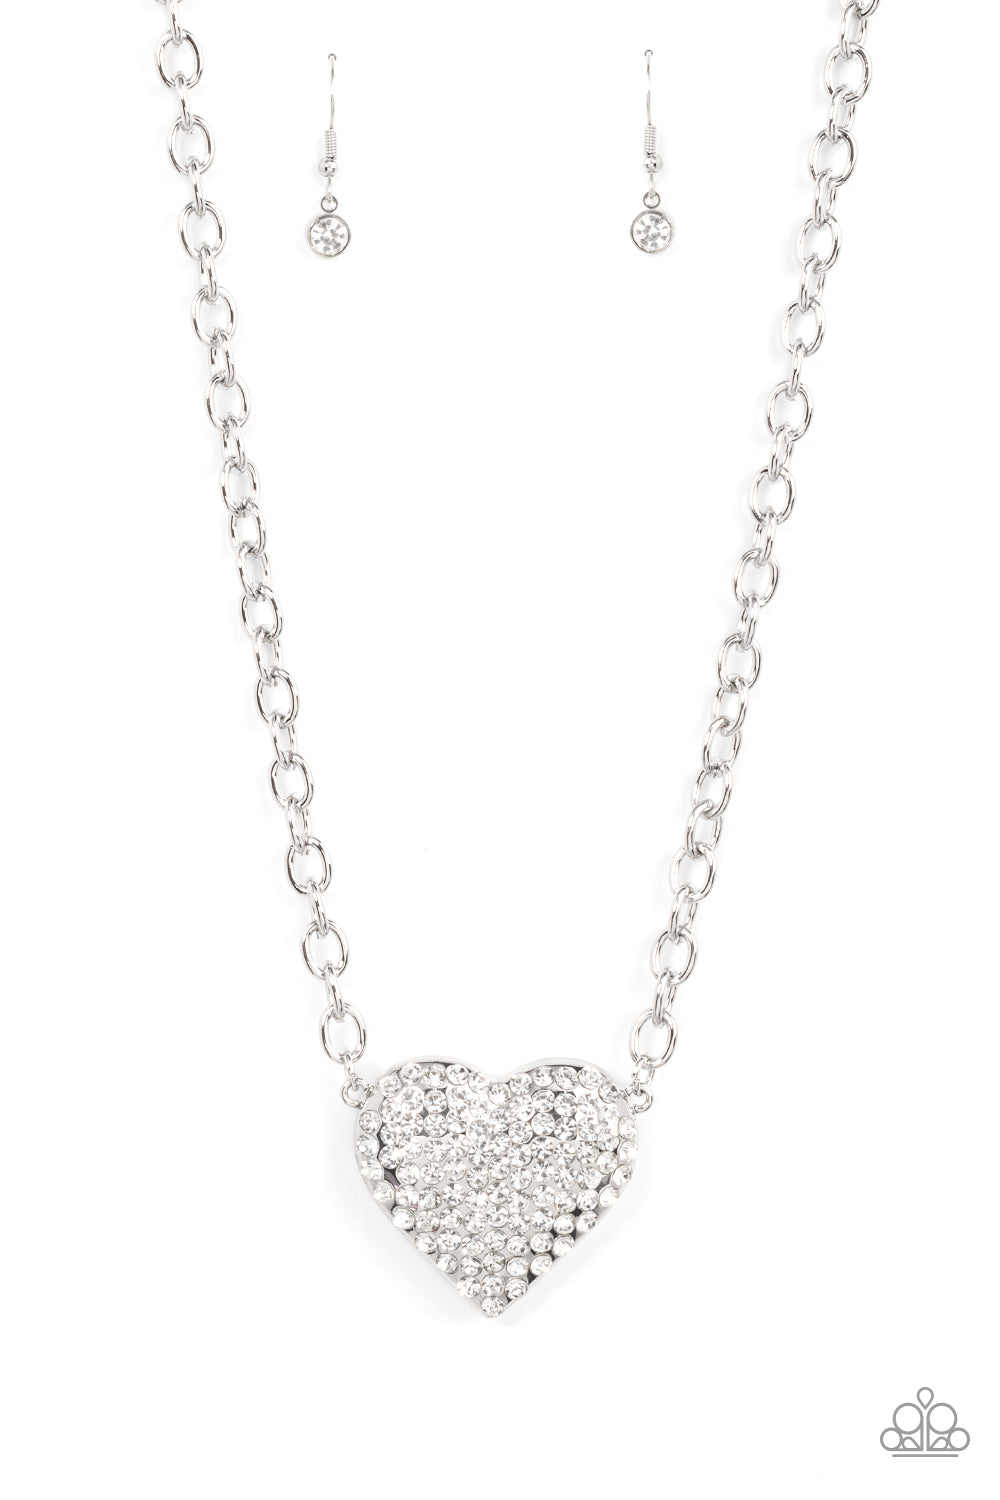 Paparazzi Accessories - Heartbreakingly Blingy - White Necklace